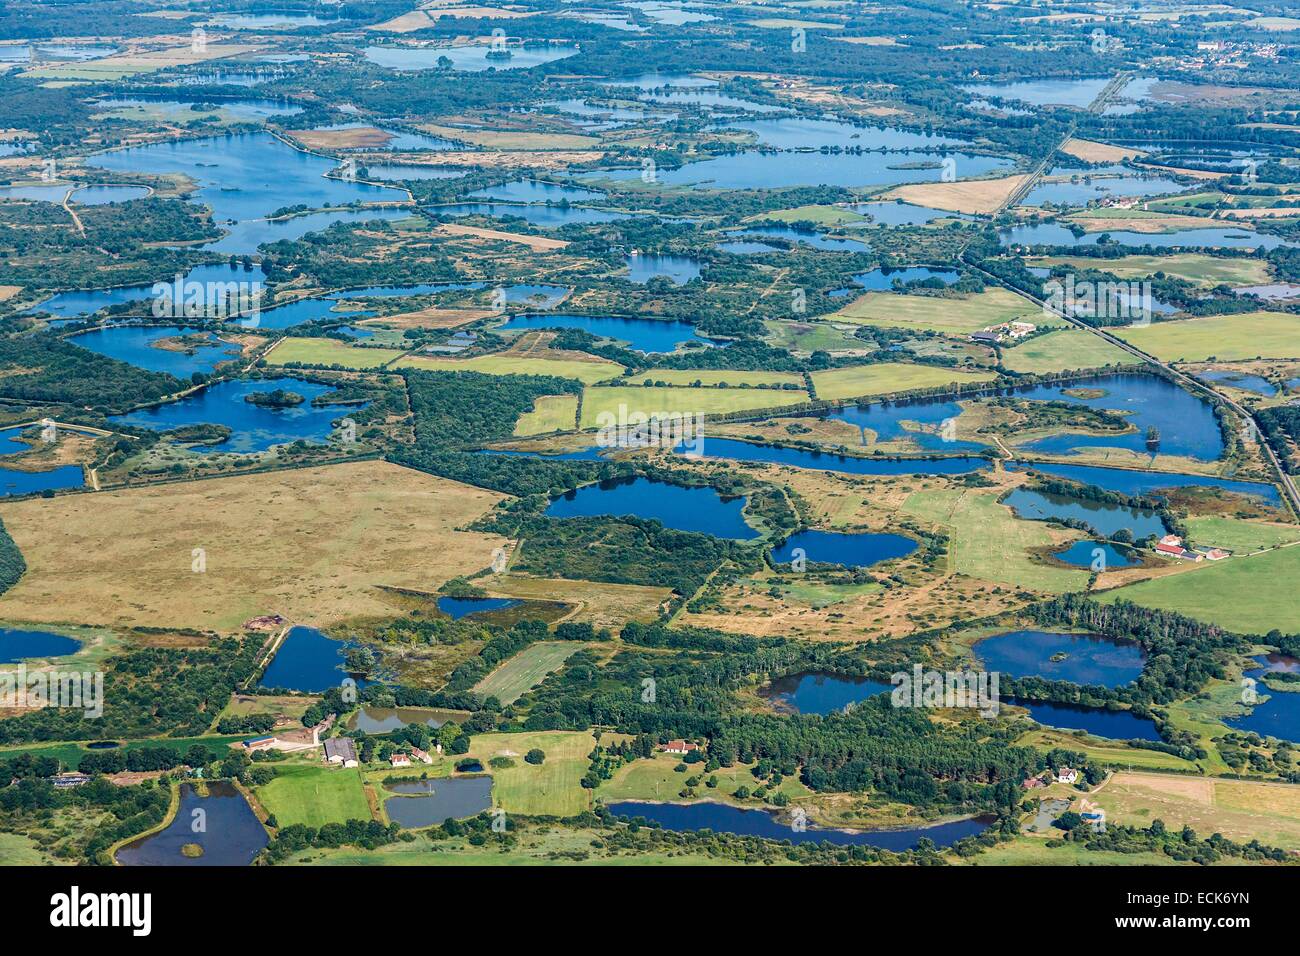 France, Indre, Migne, ponds in La Brenne regional park (aerial view) Stock Photo